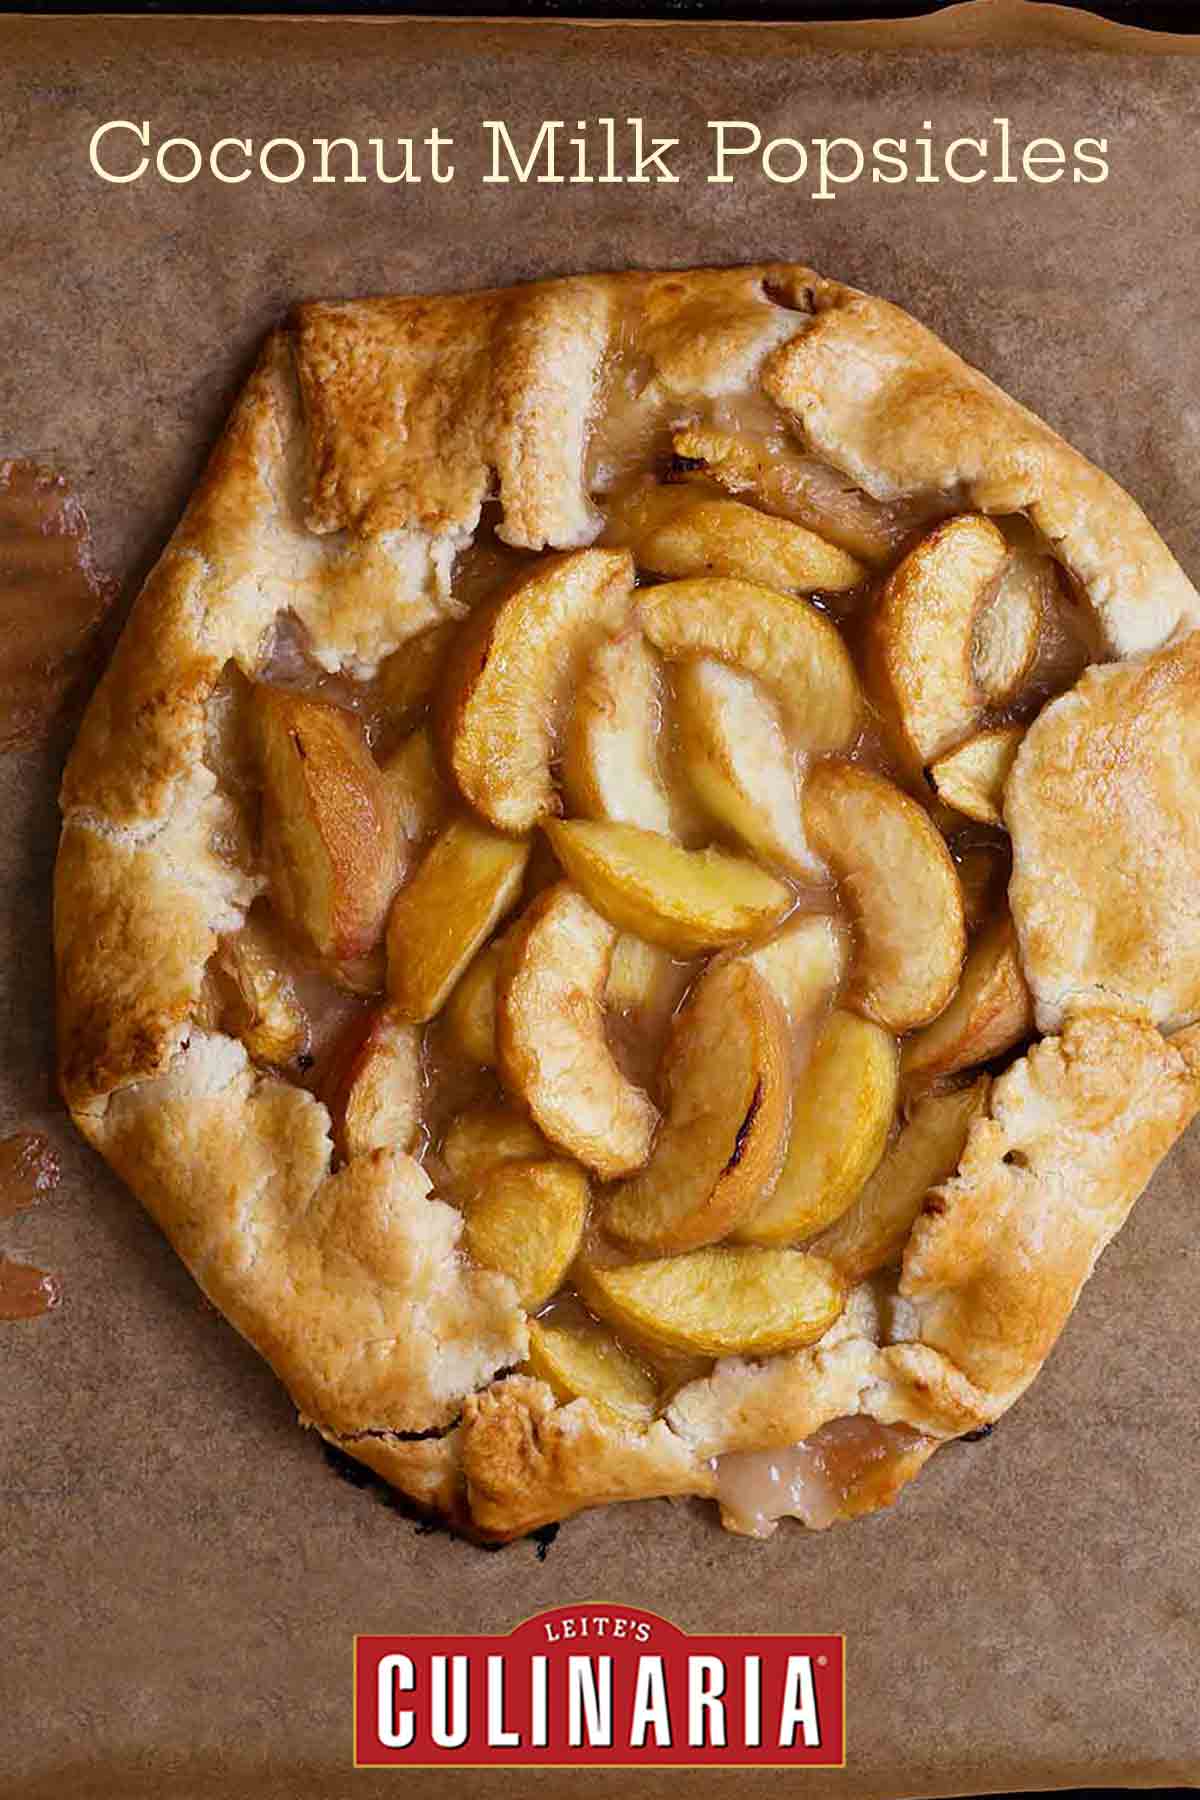 A white peach crostata--slices of white peaches in a circle of dough folded over on the edges sitting a sheet of parchment.